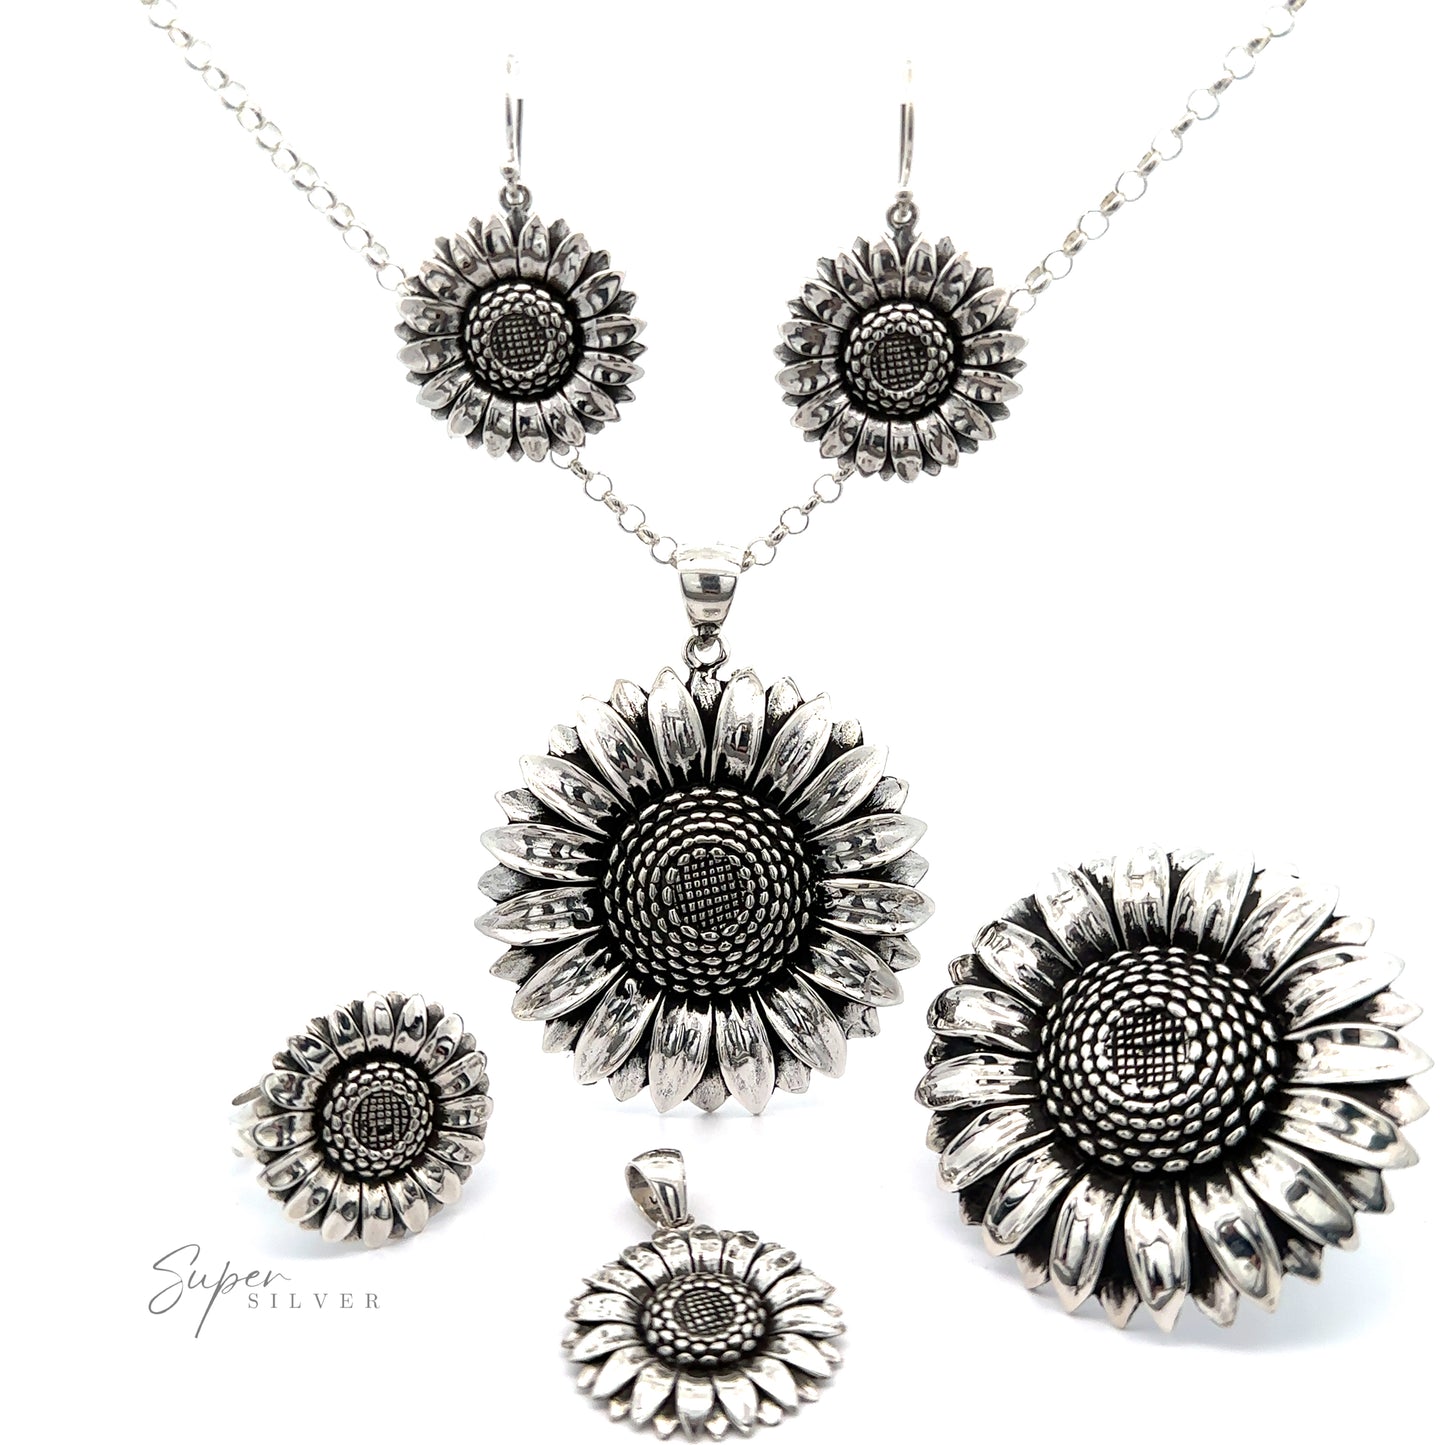 
                  
                    Adjustable Sunflower Statement Ring set featuring sunflower designs with earrings, additional statement rings, pendants, and a necklace, displayed on a white background.
                  
                